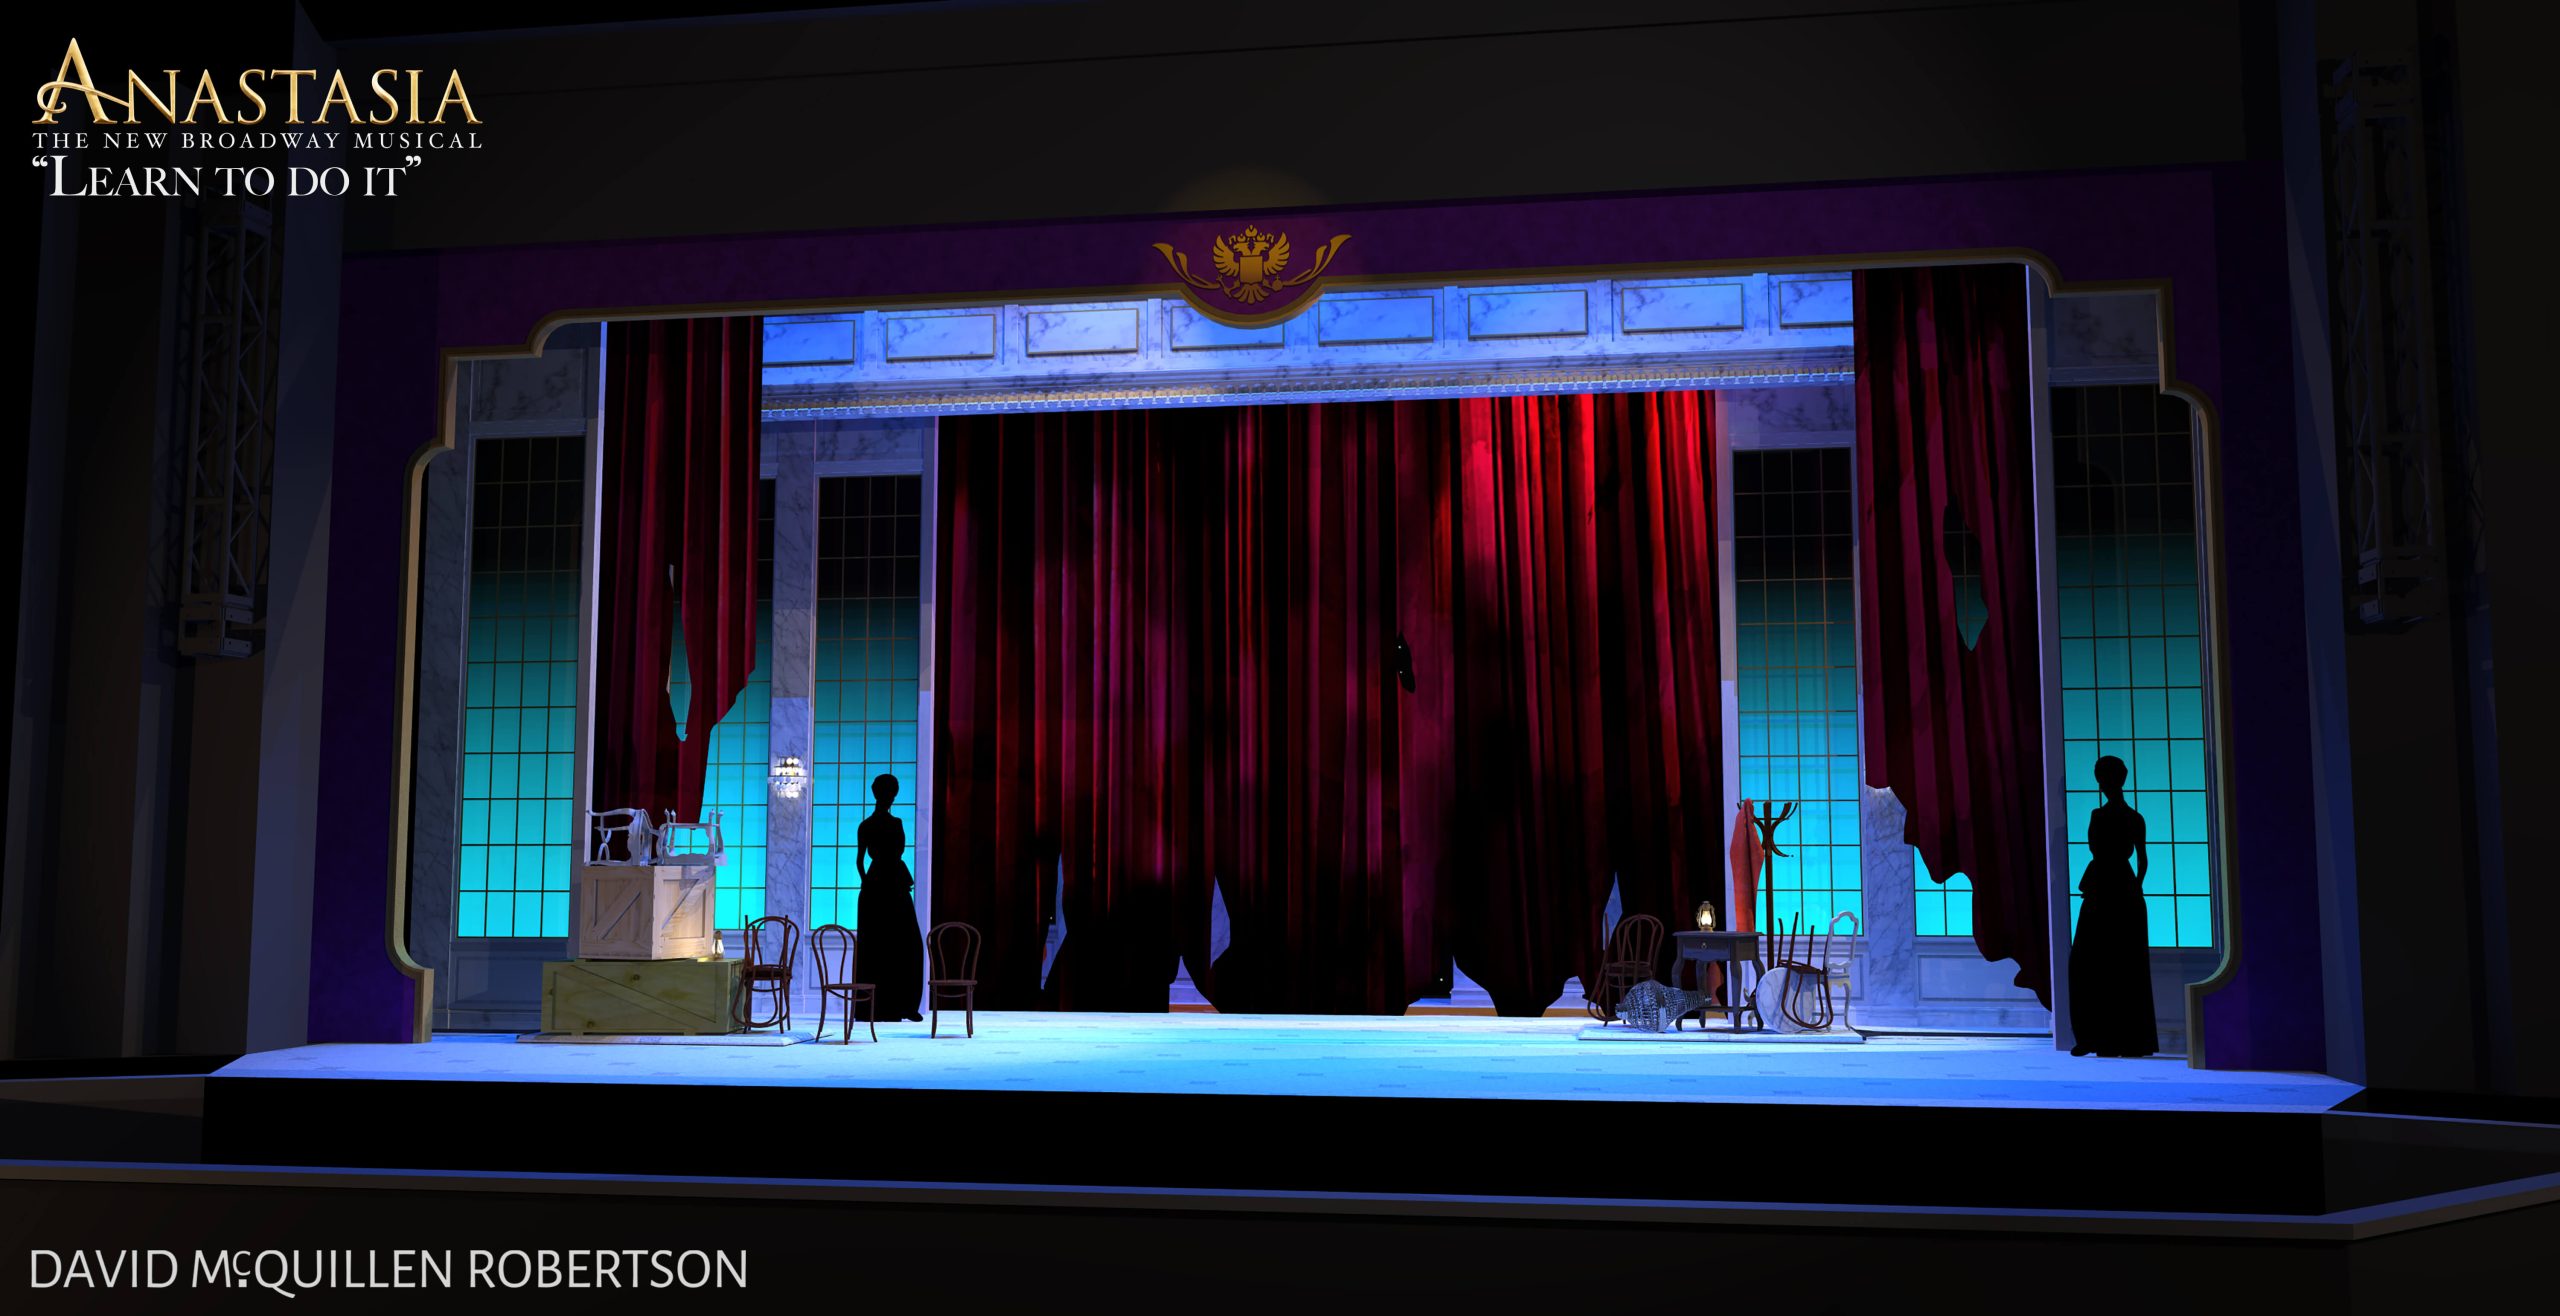 Anastasia scenery rental - Learn to do it musical scene - Front Row Theatrical Rental